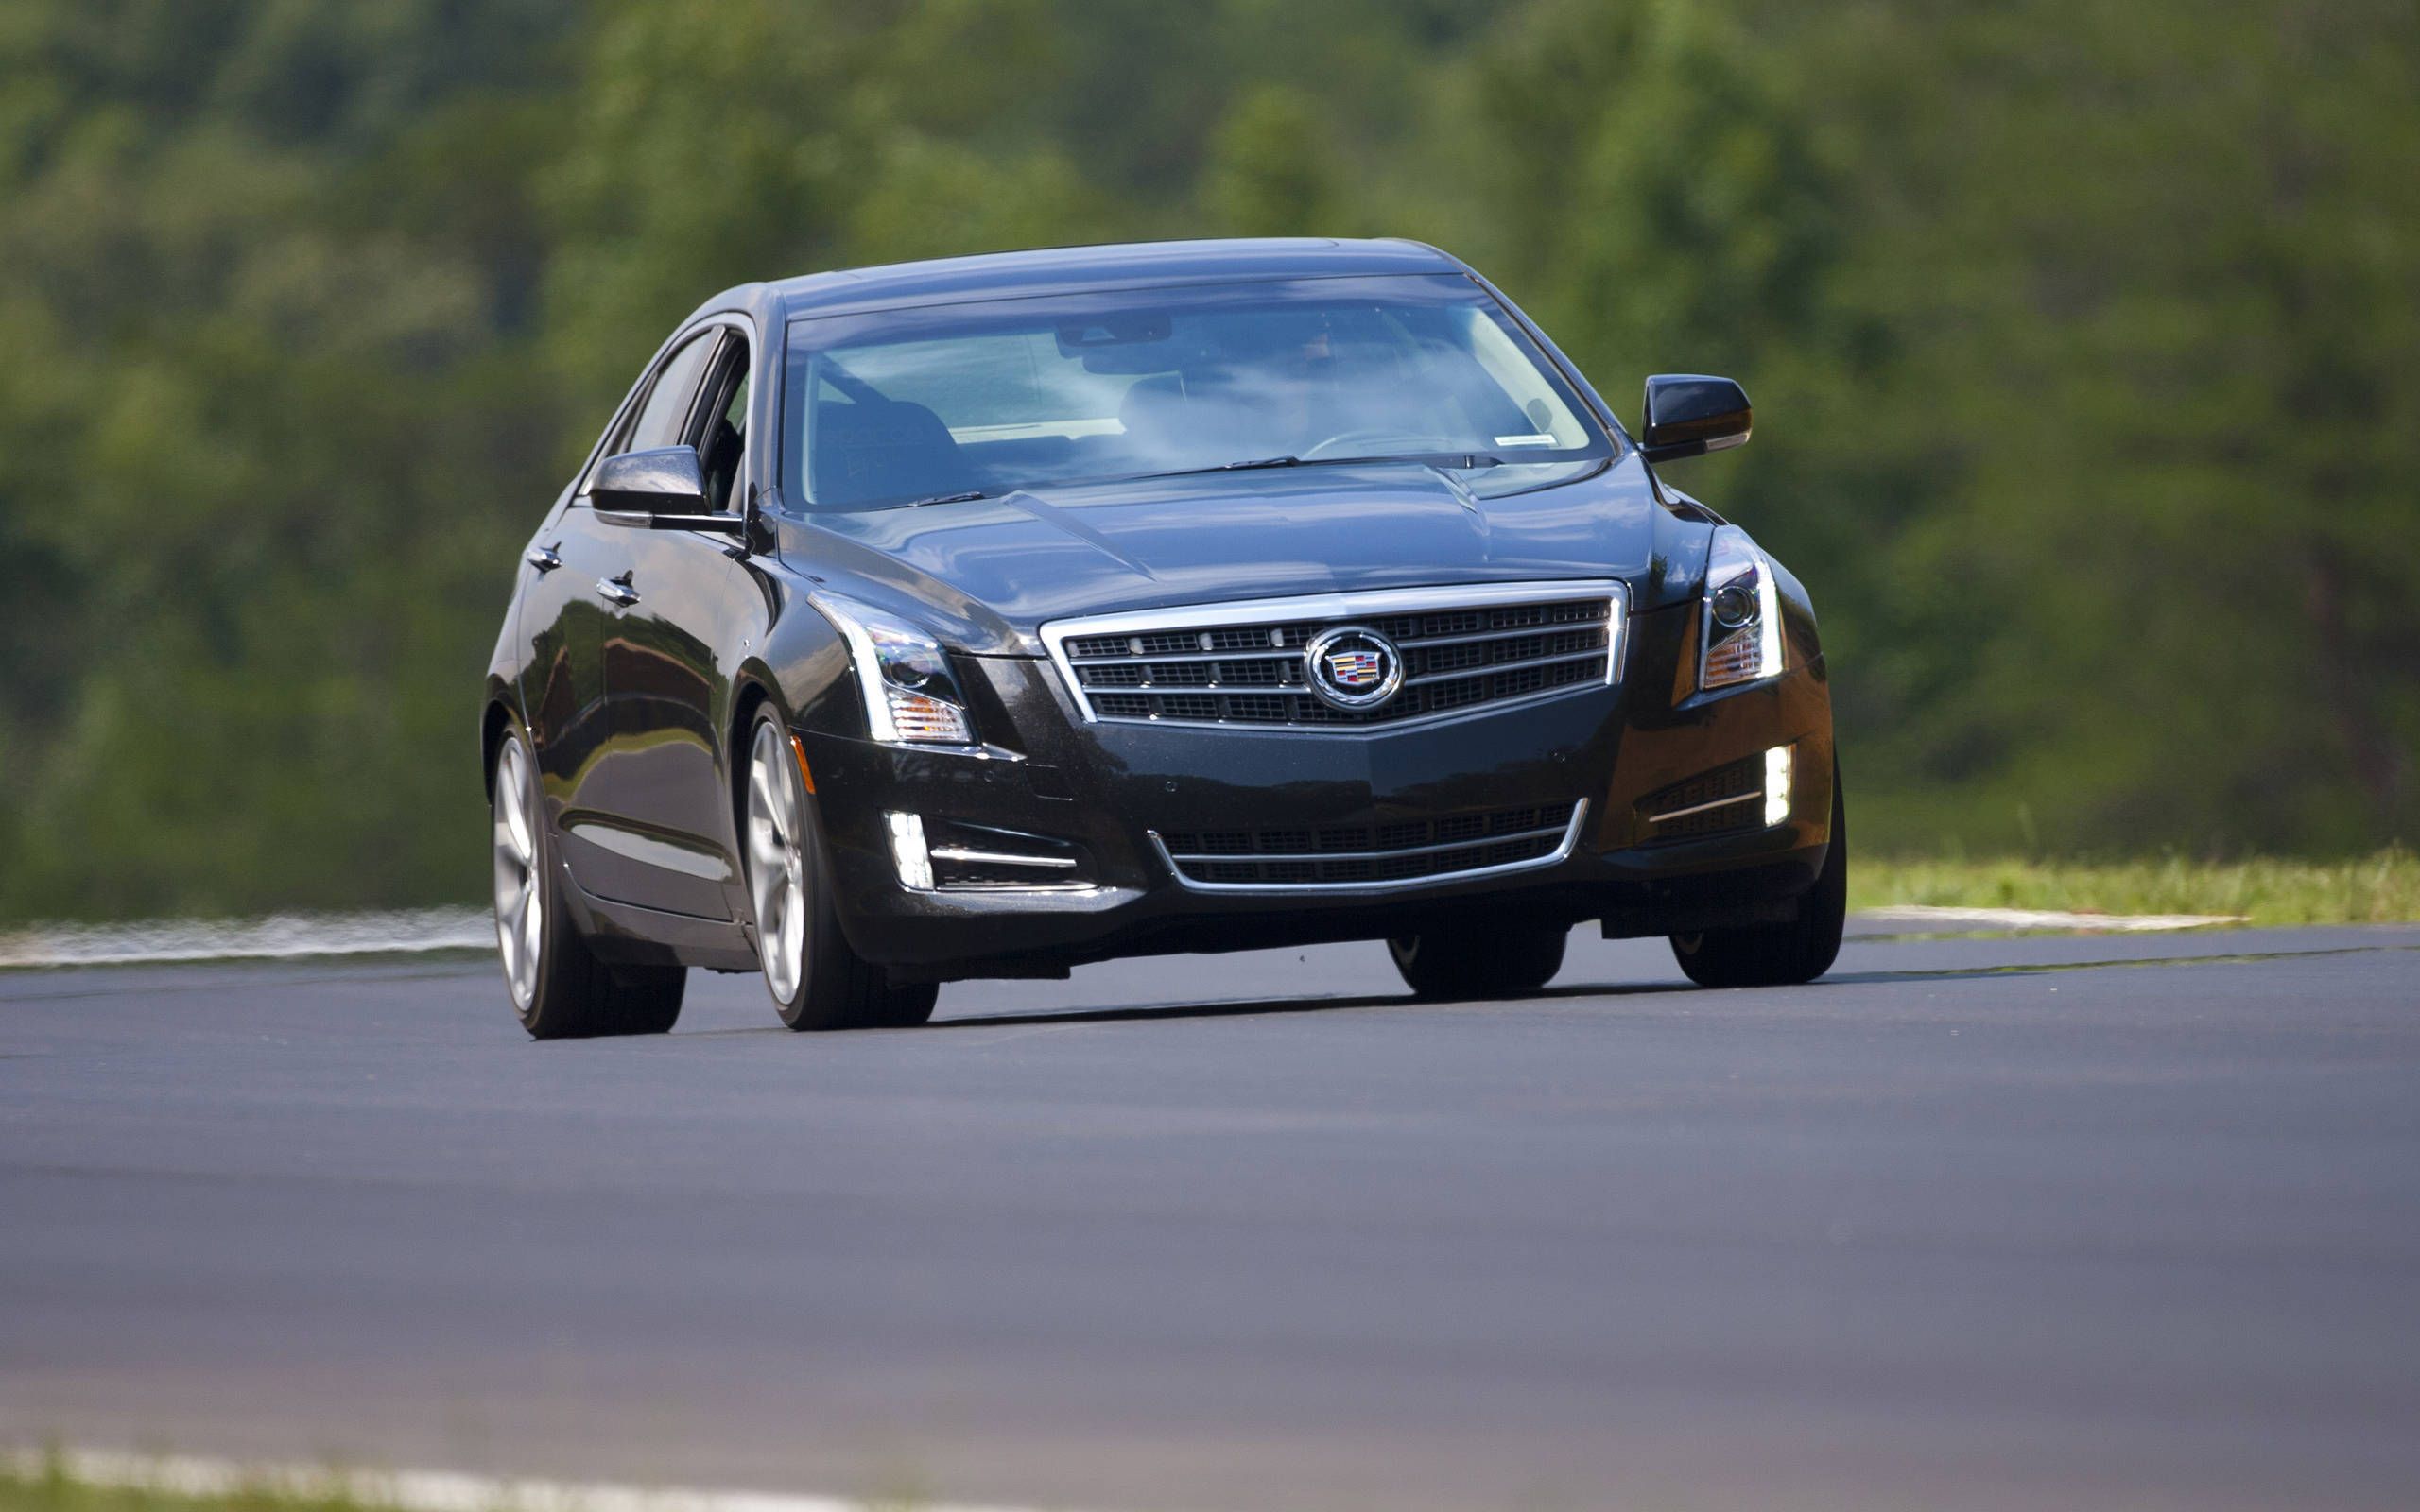 2014 Cadillac ATS 2.0T Premium Collection review notes